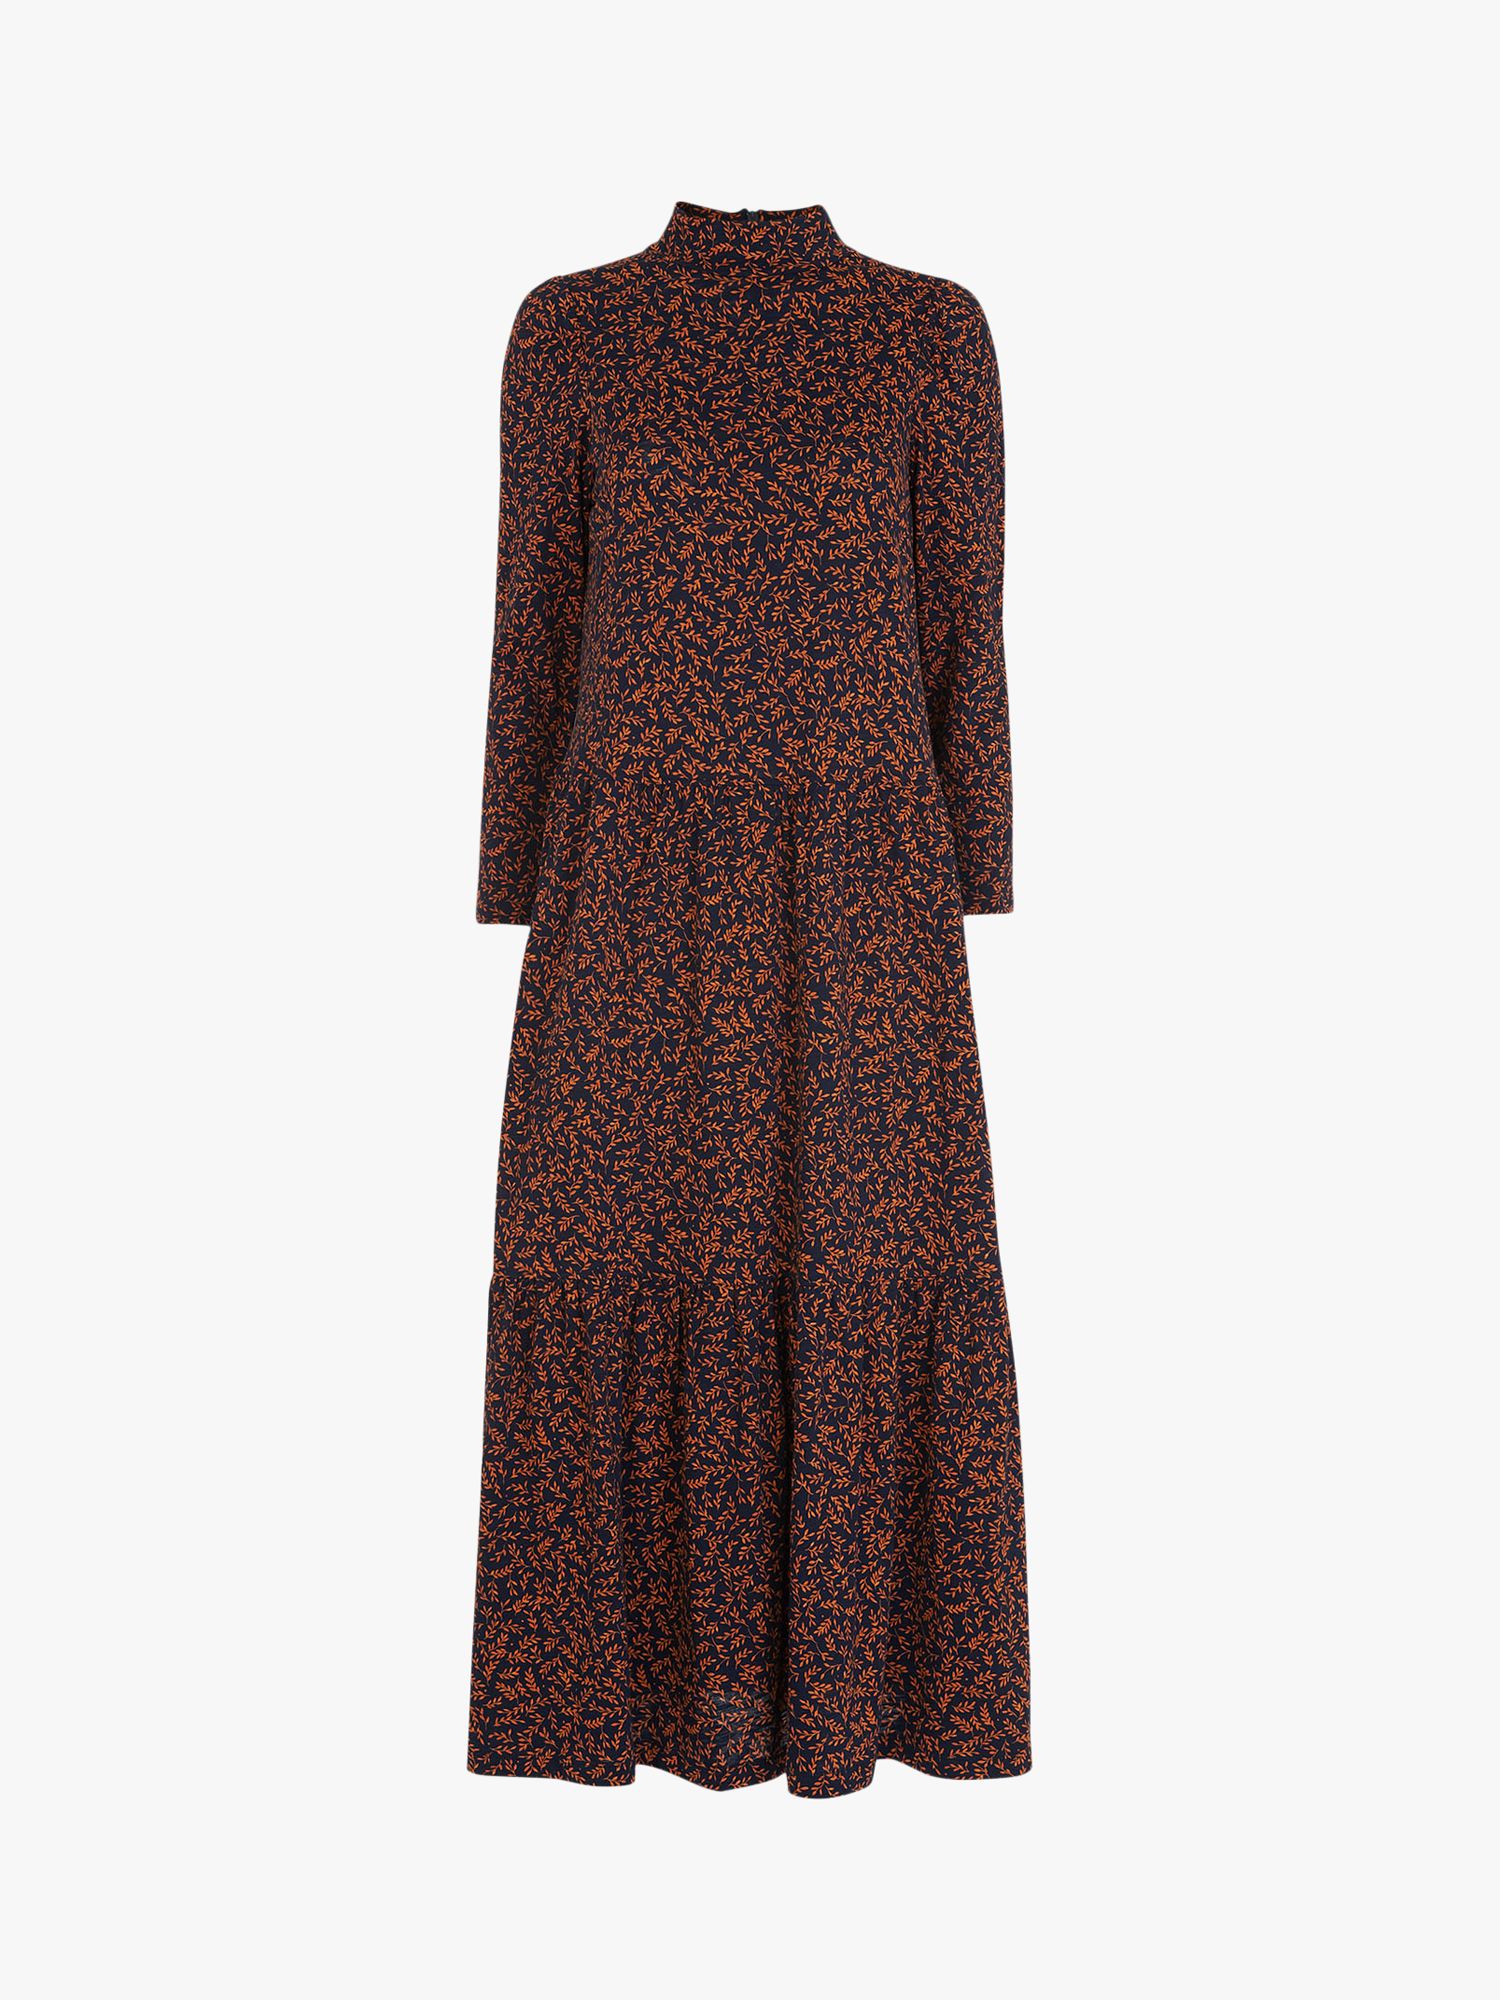 Whistles Autumn Leaves Tiered Maxi Dress, Multi at John Lewis & Partners